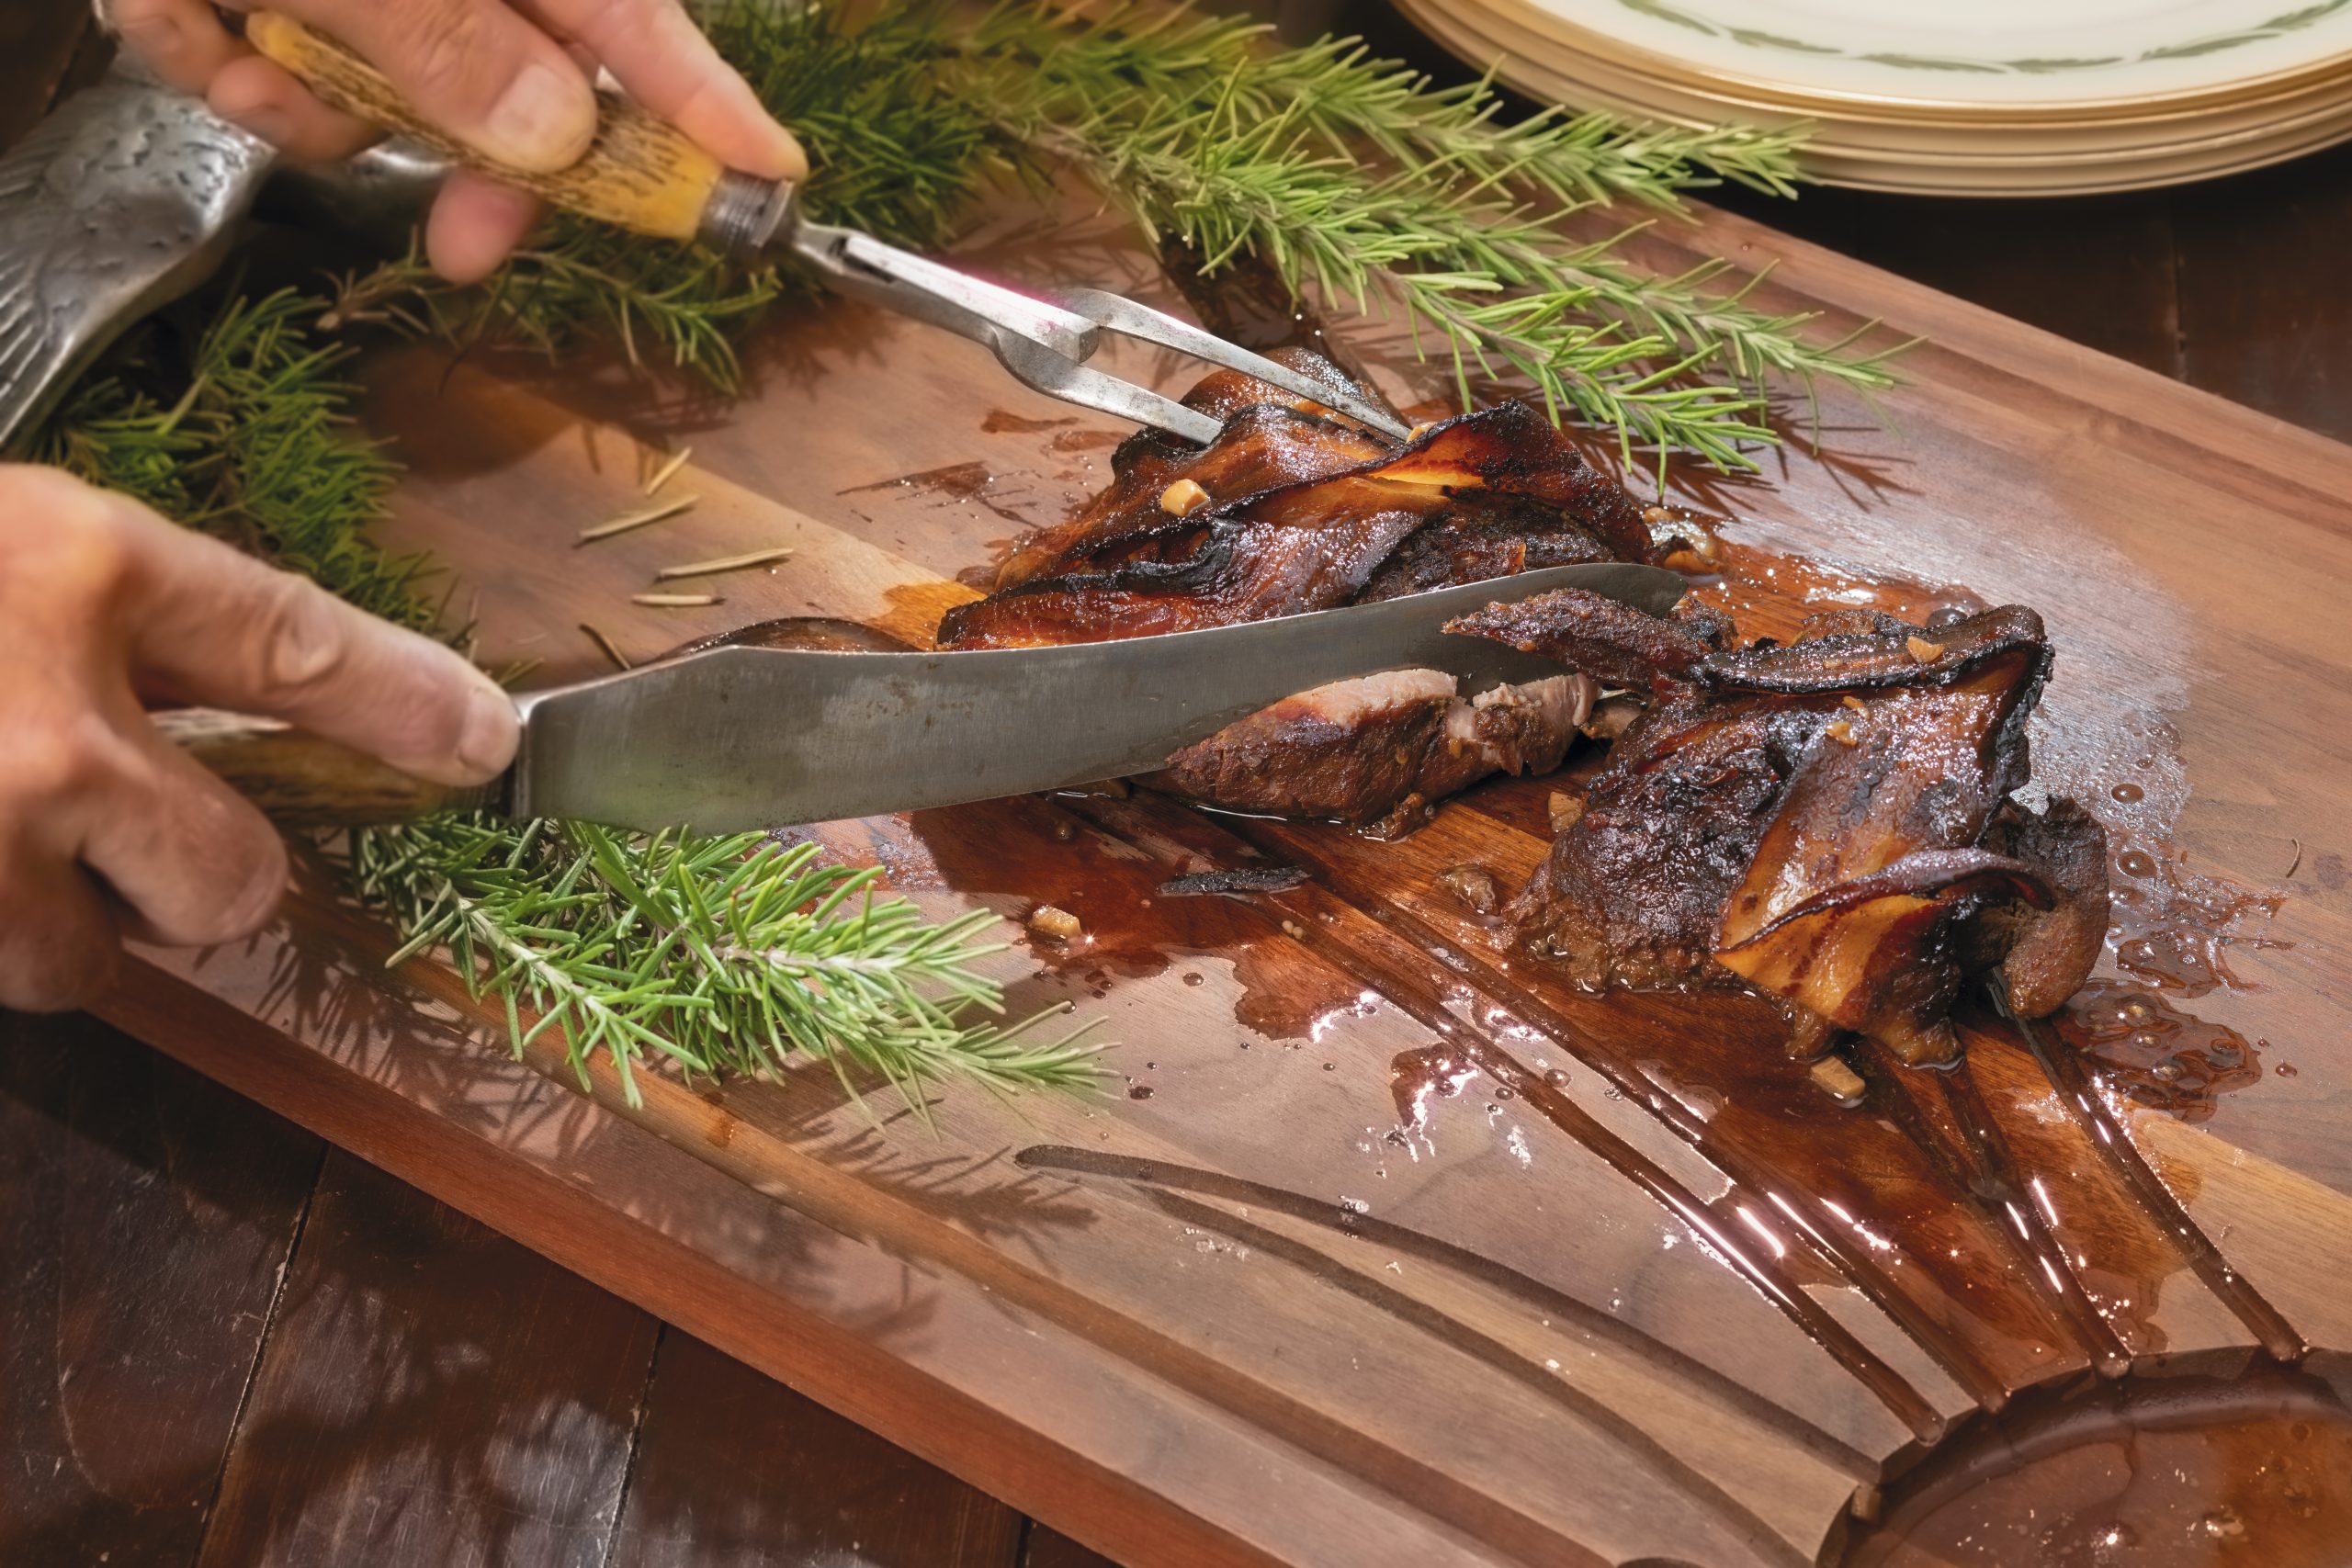 Over time, you will learn what cuts or methods of preparation you prefer. If you aren’t already famished from the aromas that have been wafting through the air for hours by the time the venison roast is ready to carve, then it’s quite possible your sensory glands are out of whack.